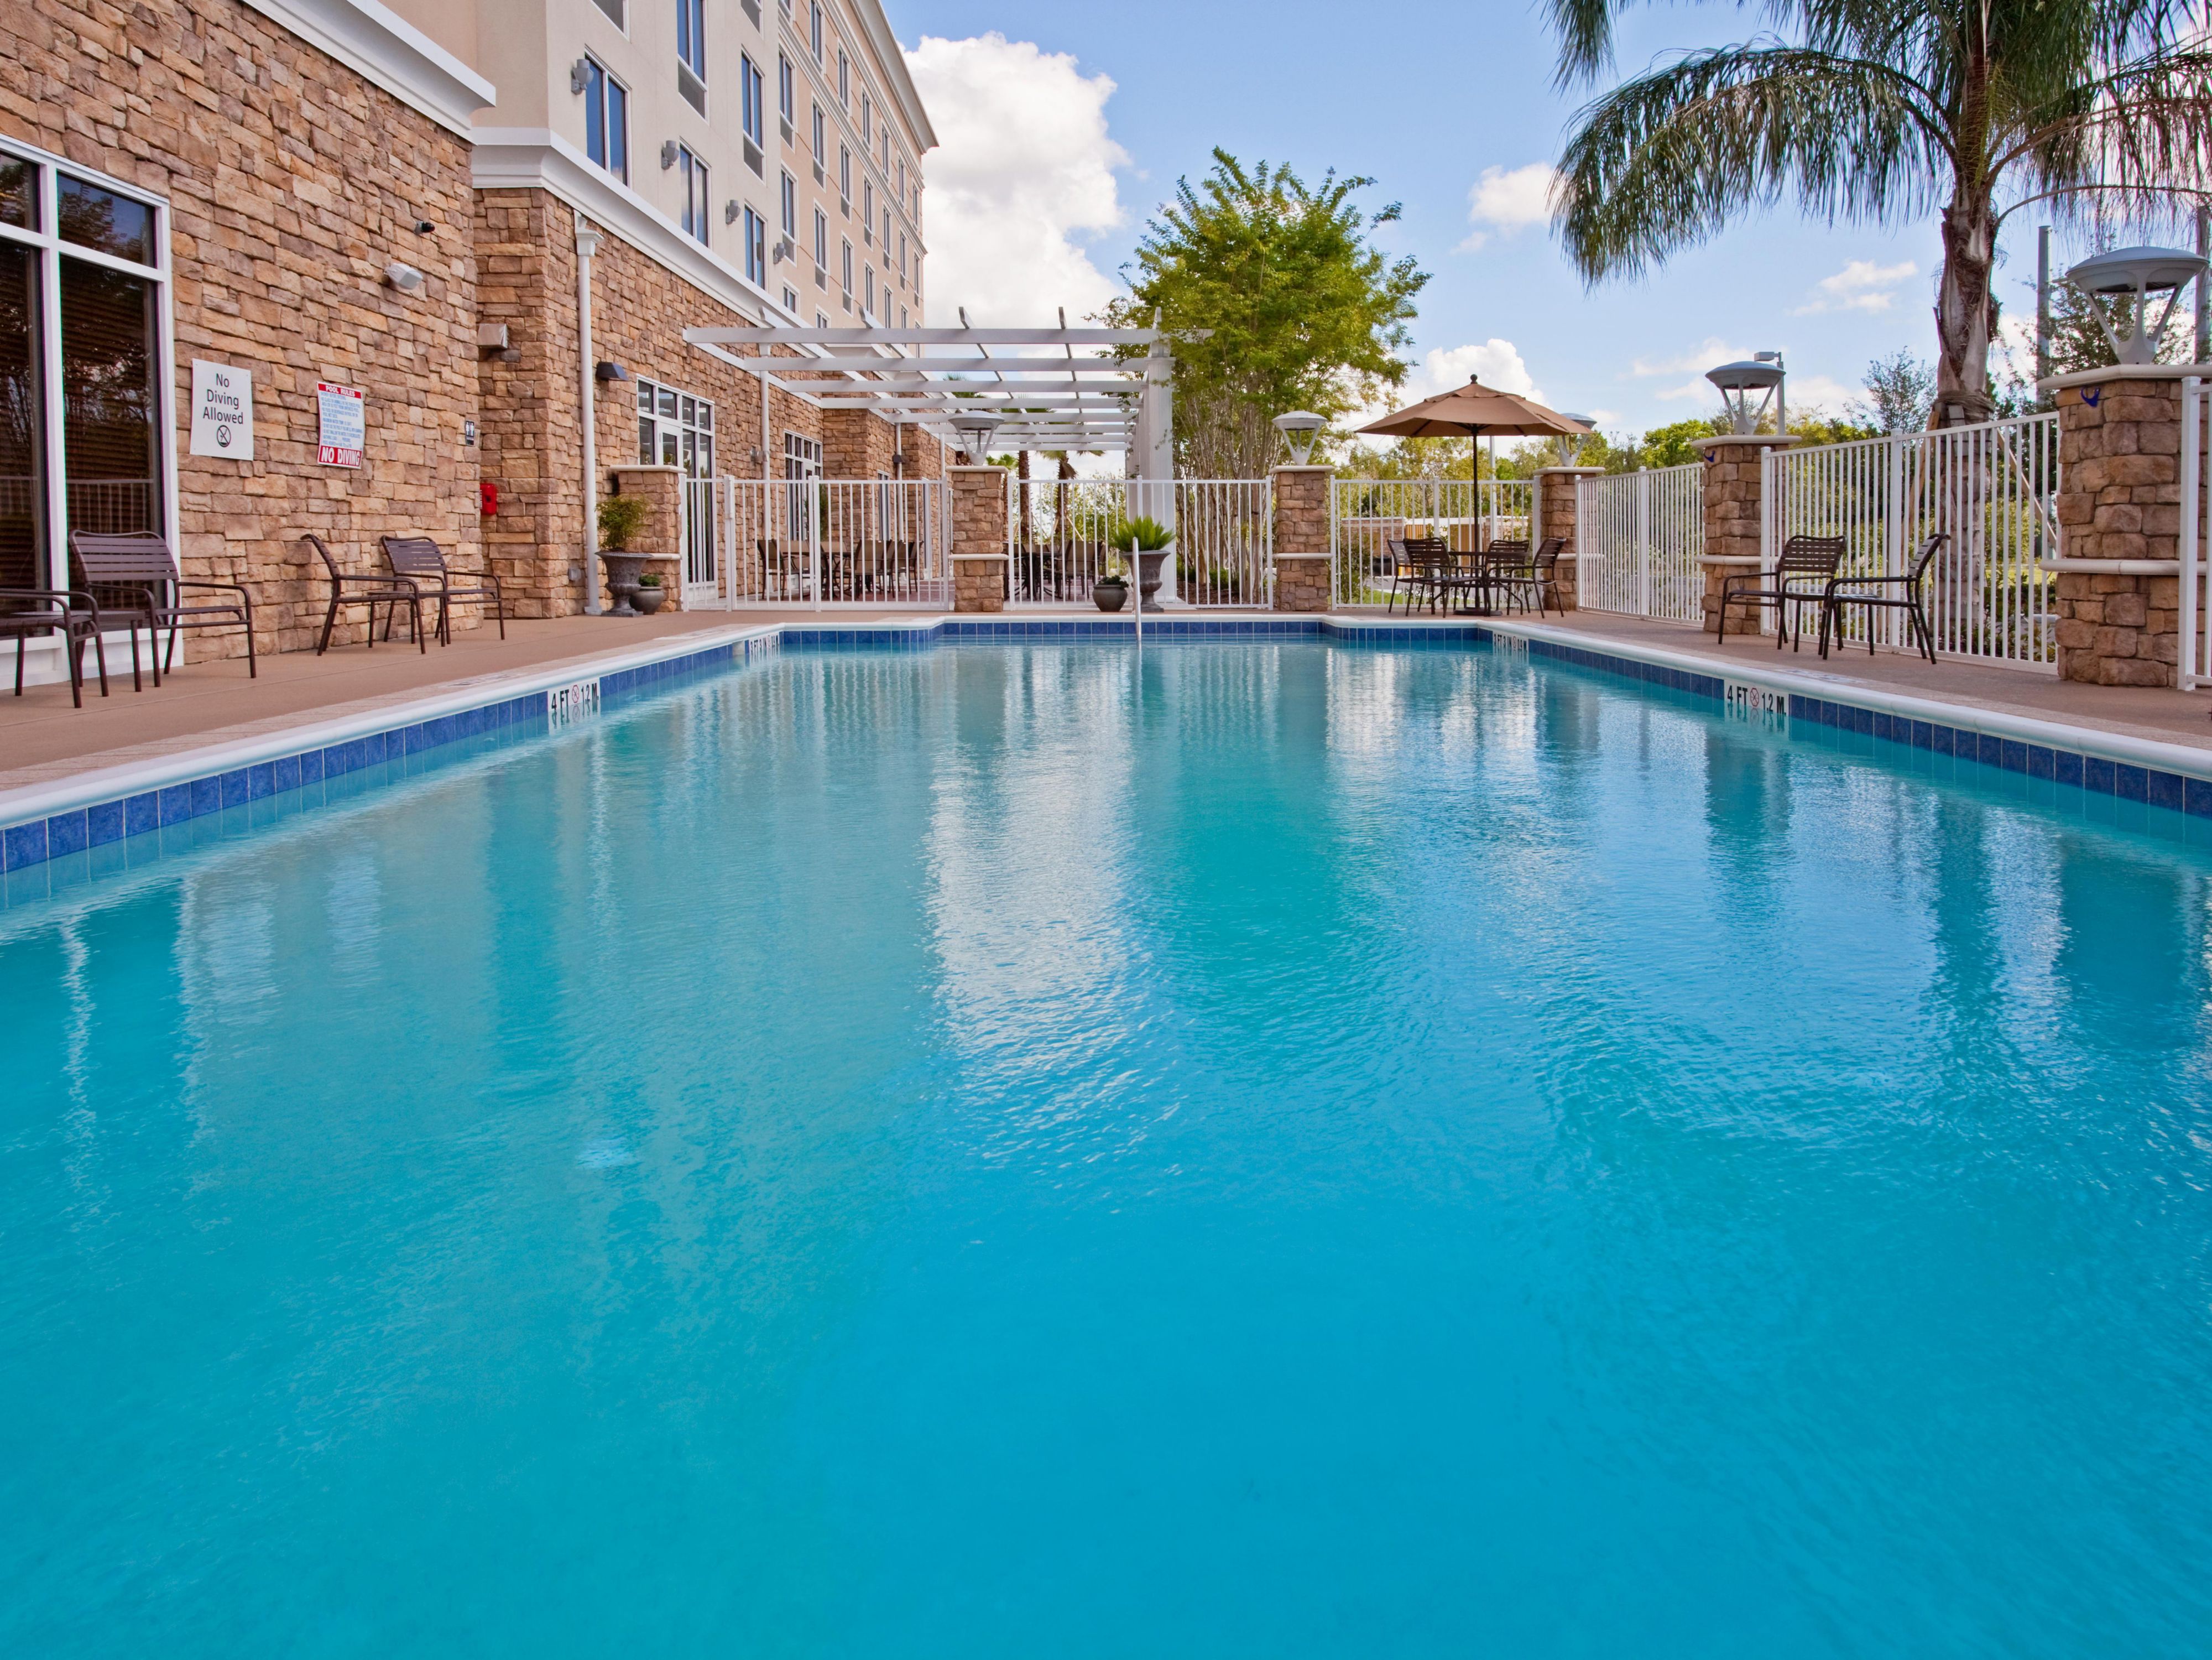 We have a beautiful outdoor swimming pool that is open year round. Hours of Operation 6am to 10pm daily. 